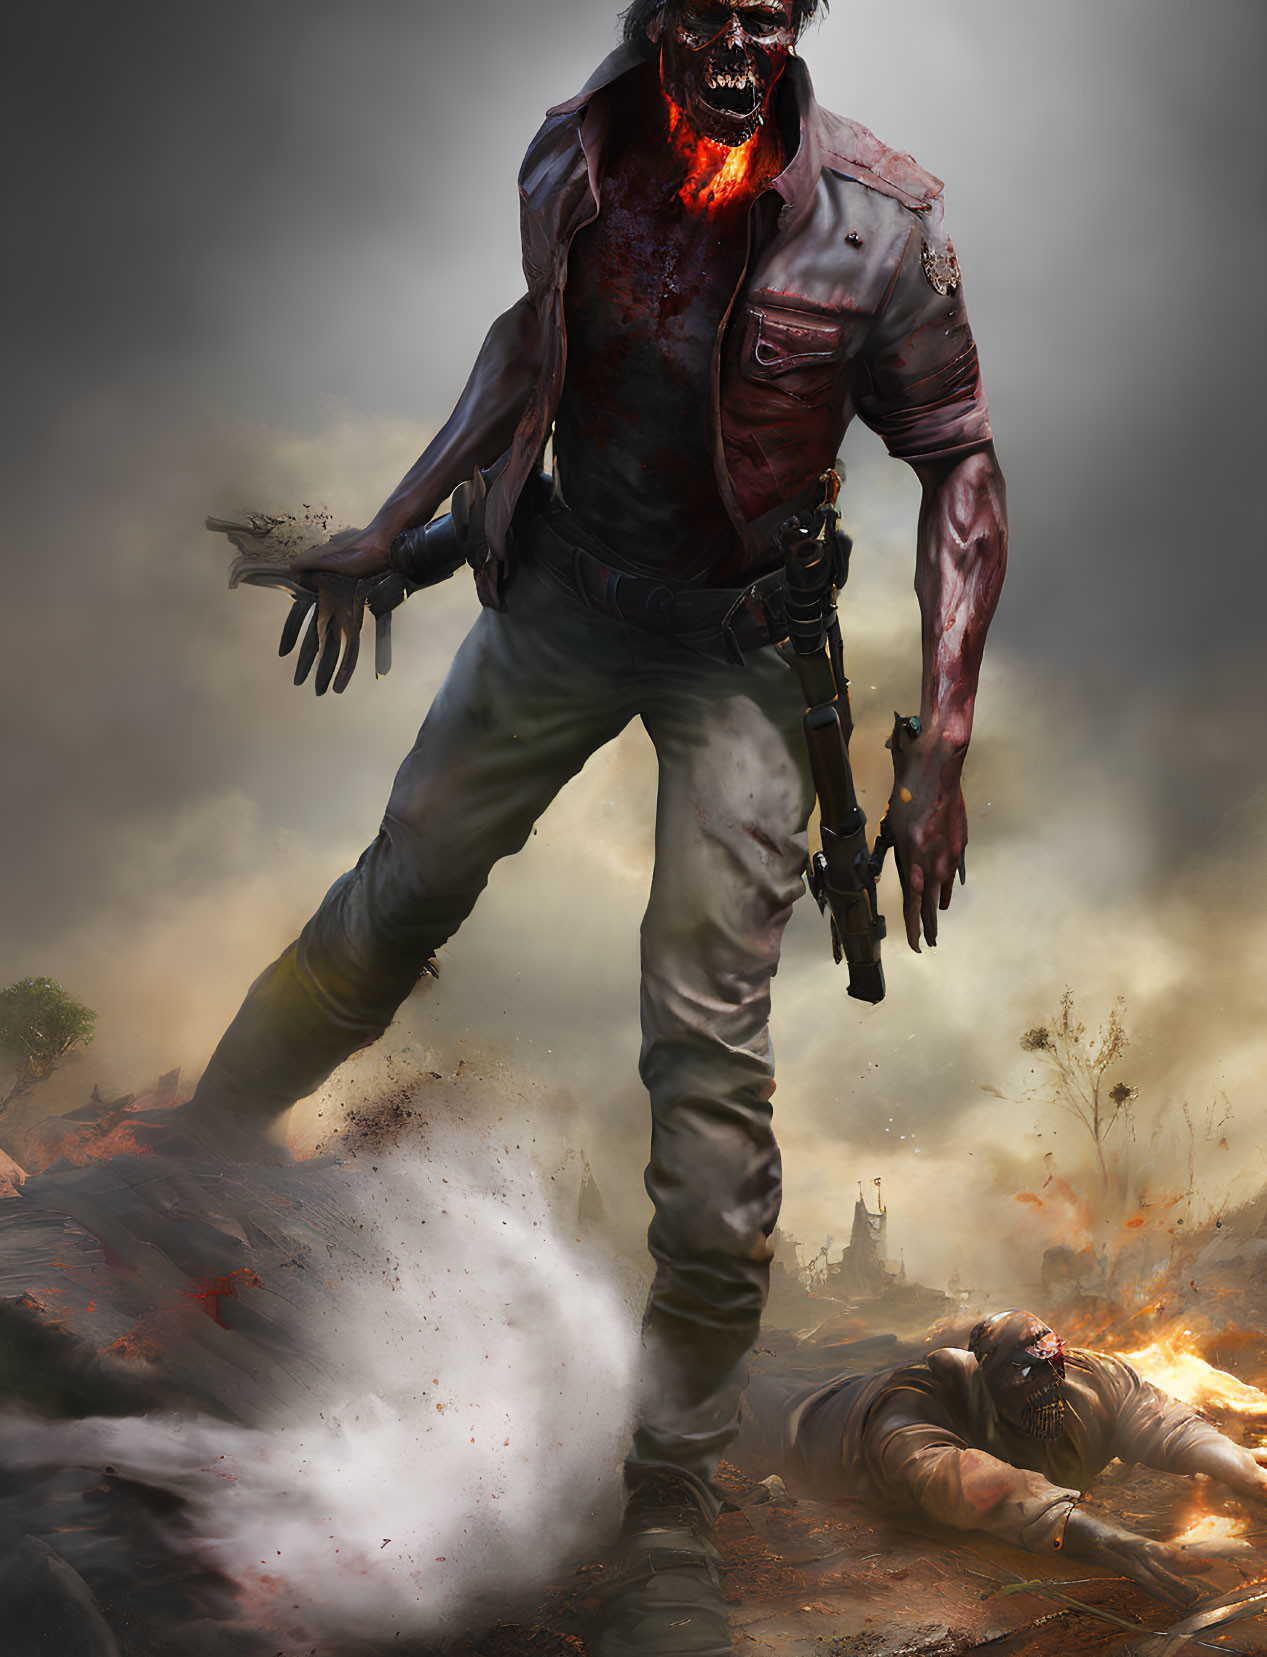 Detailed illustration of a zombie with exposed jaw, gun, in apocalyptic battlefield